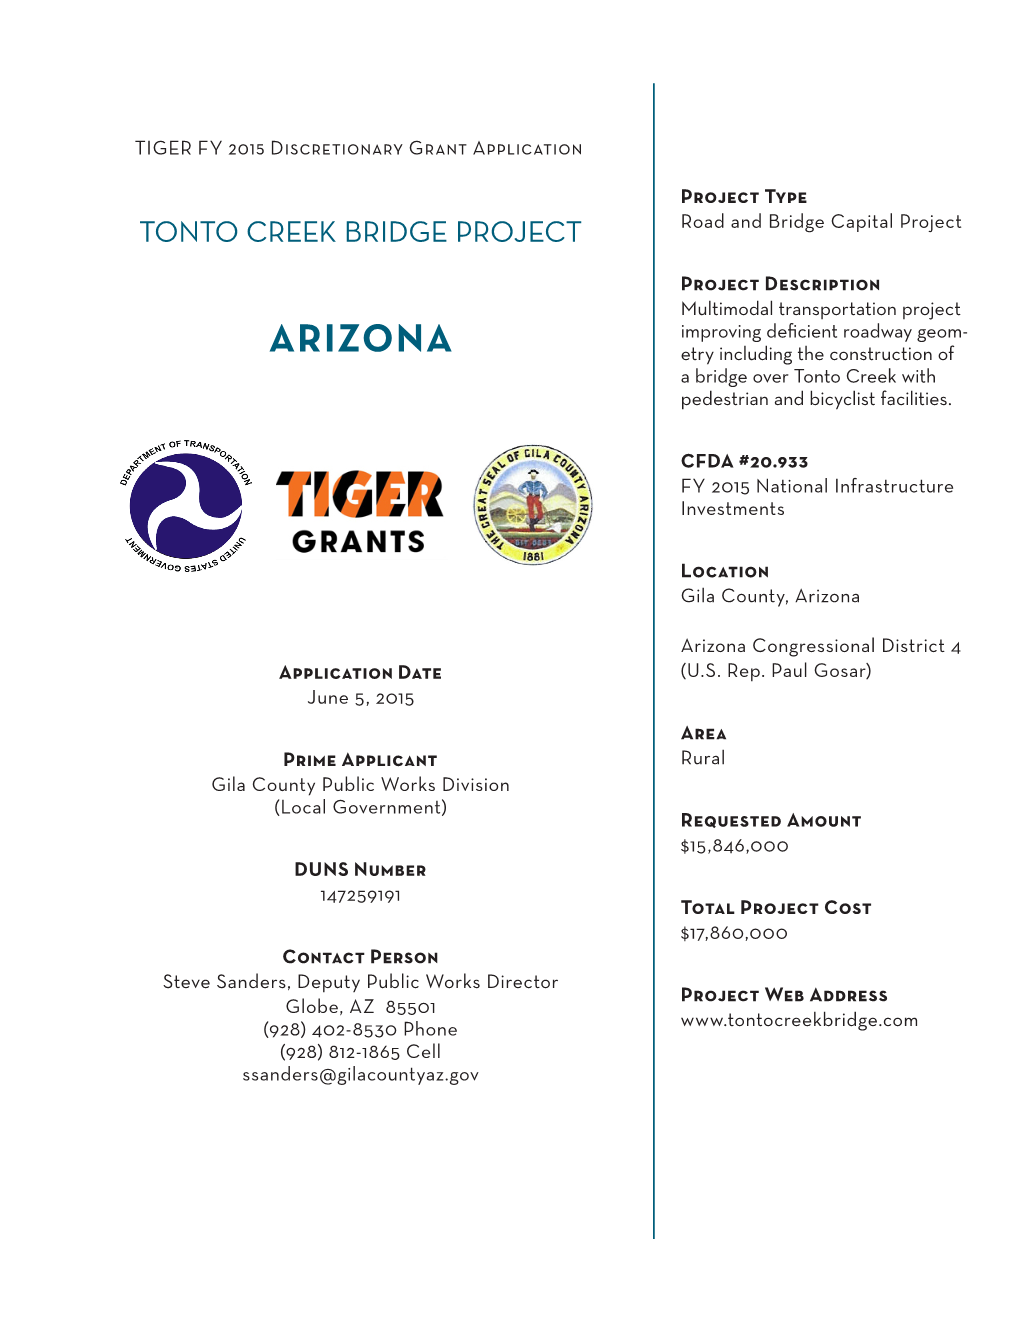 ARIZONA Etry Including the Construction of a Bridge Over Tonto Creek with Pedestrian and Bicyclist Facilities